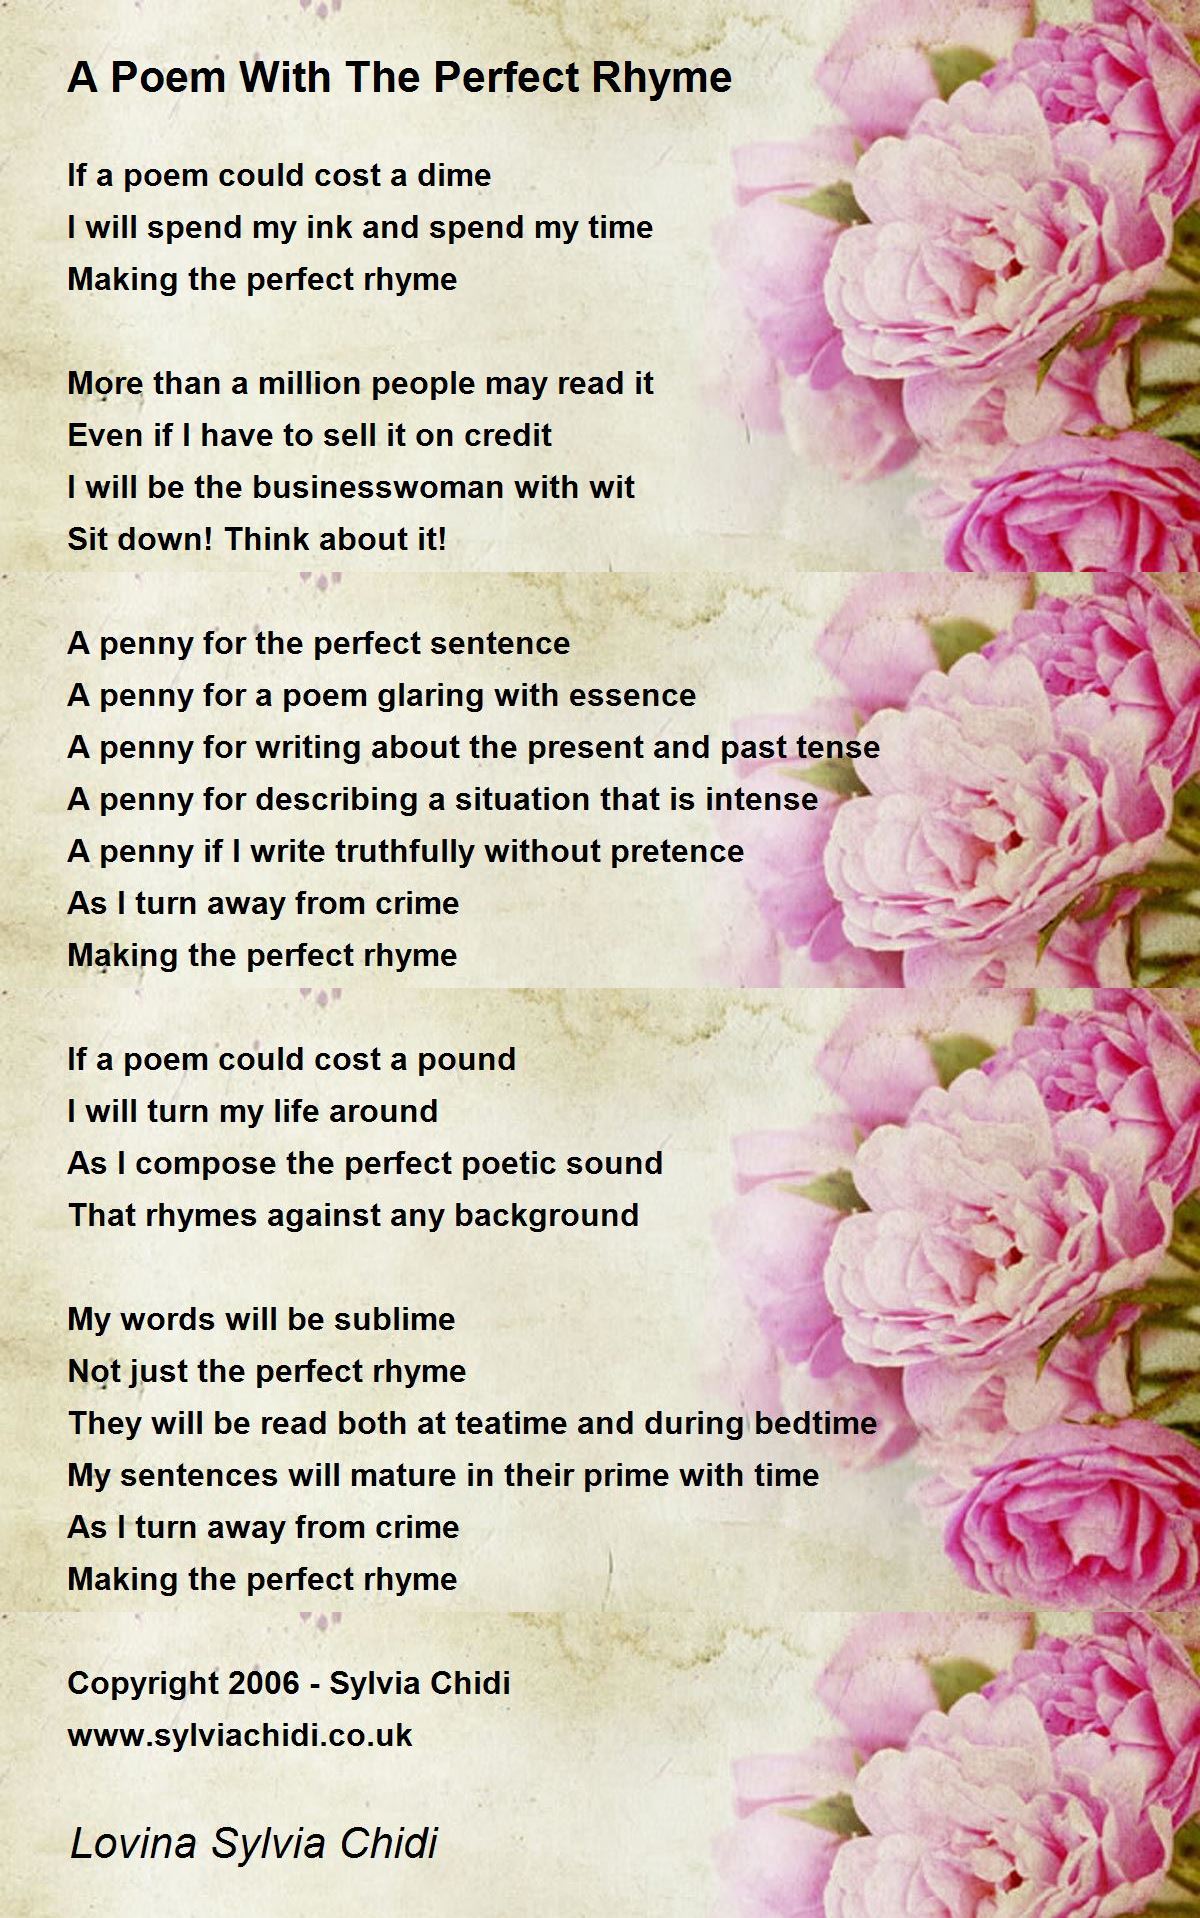 A Poem With The Perfect Rhyme by Sylvia Chidi - A Poem With The